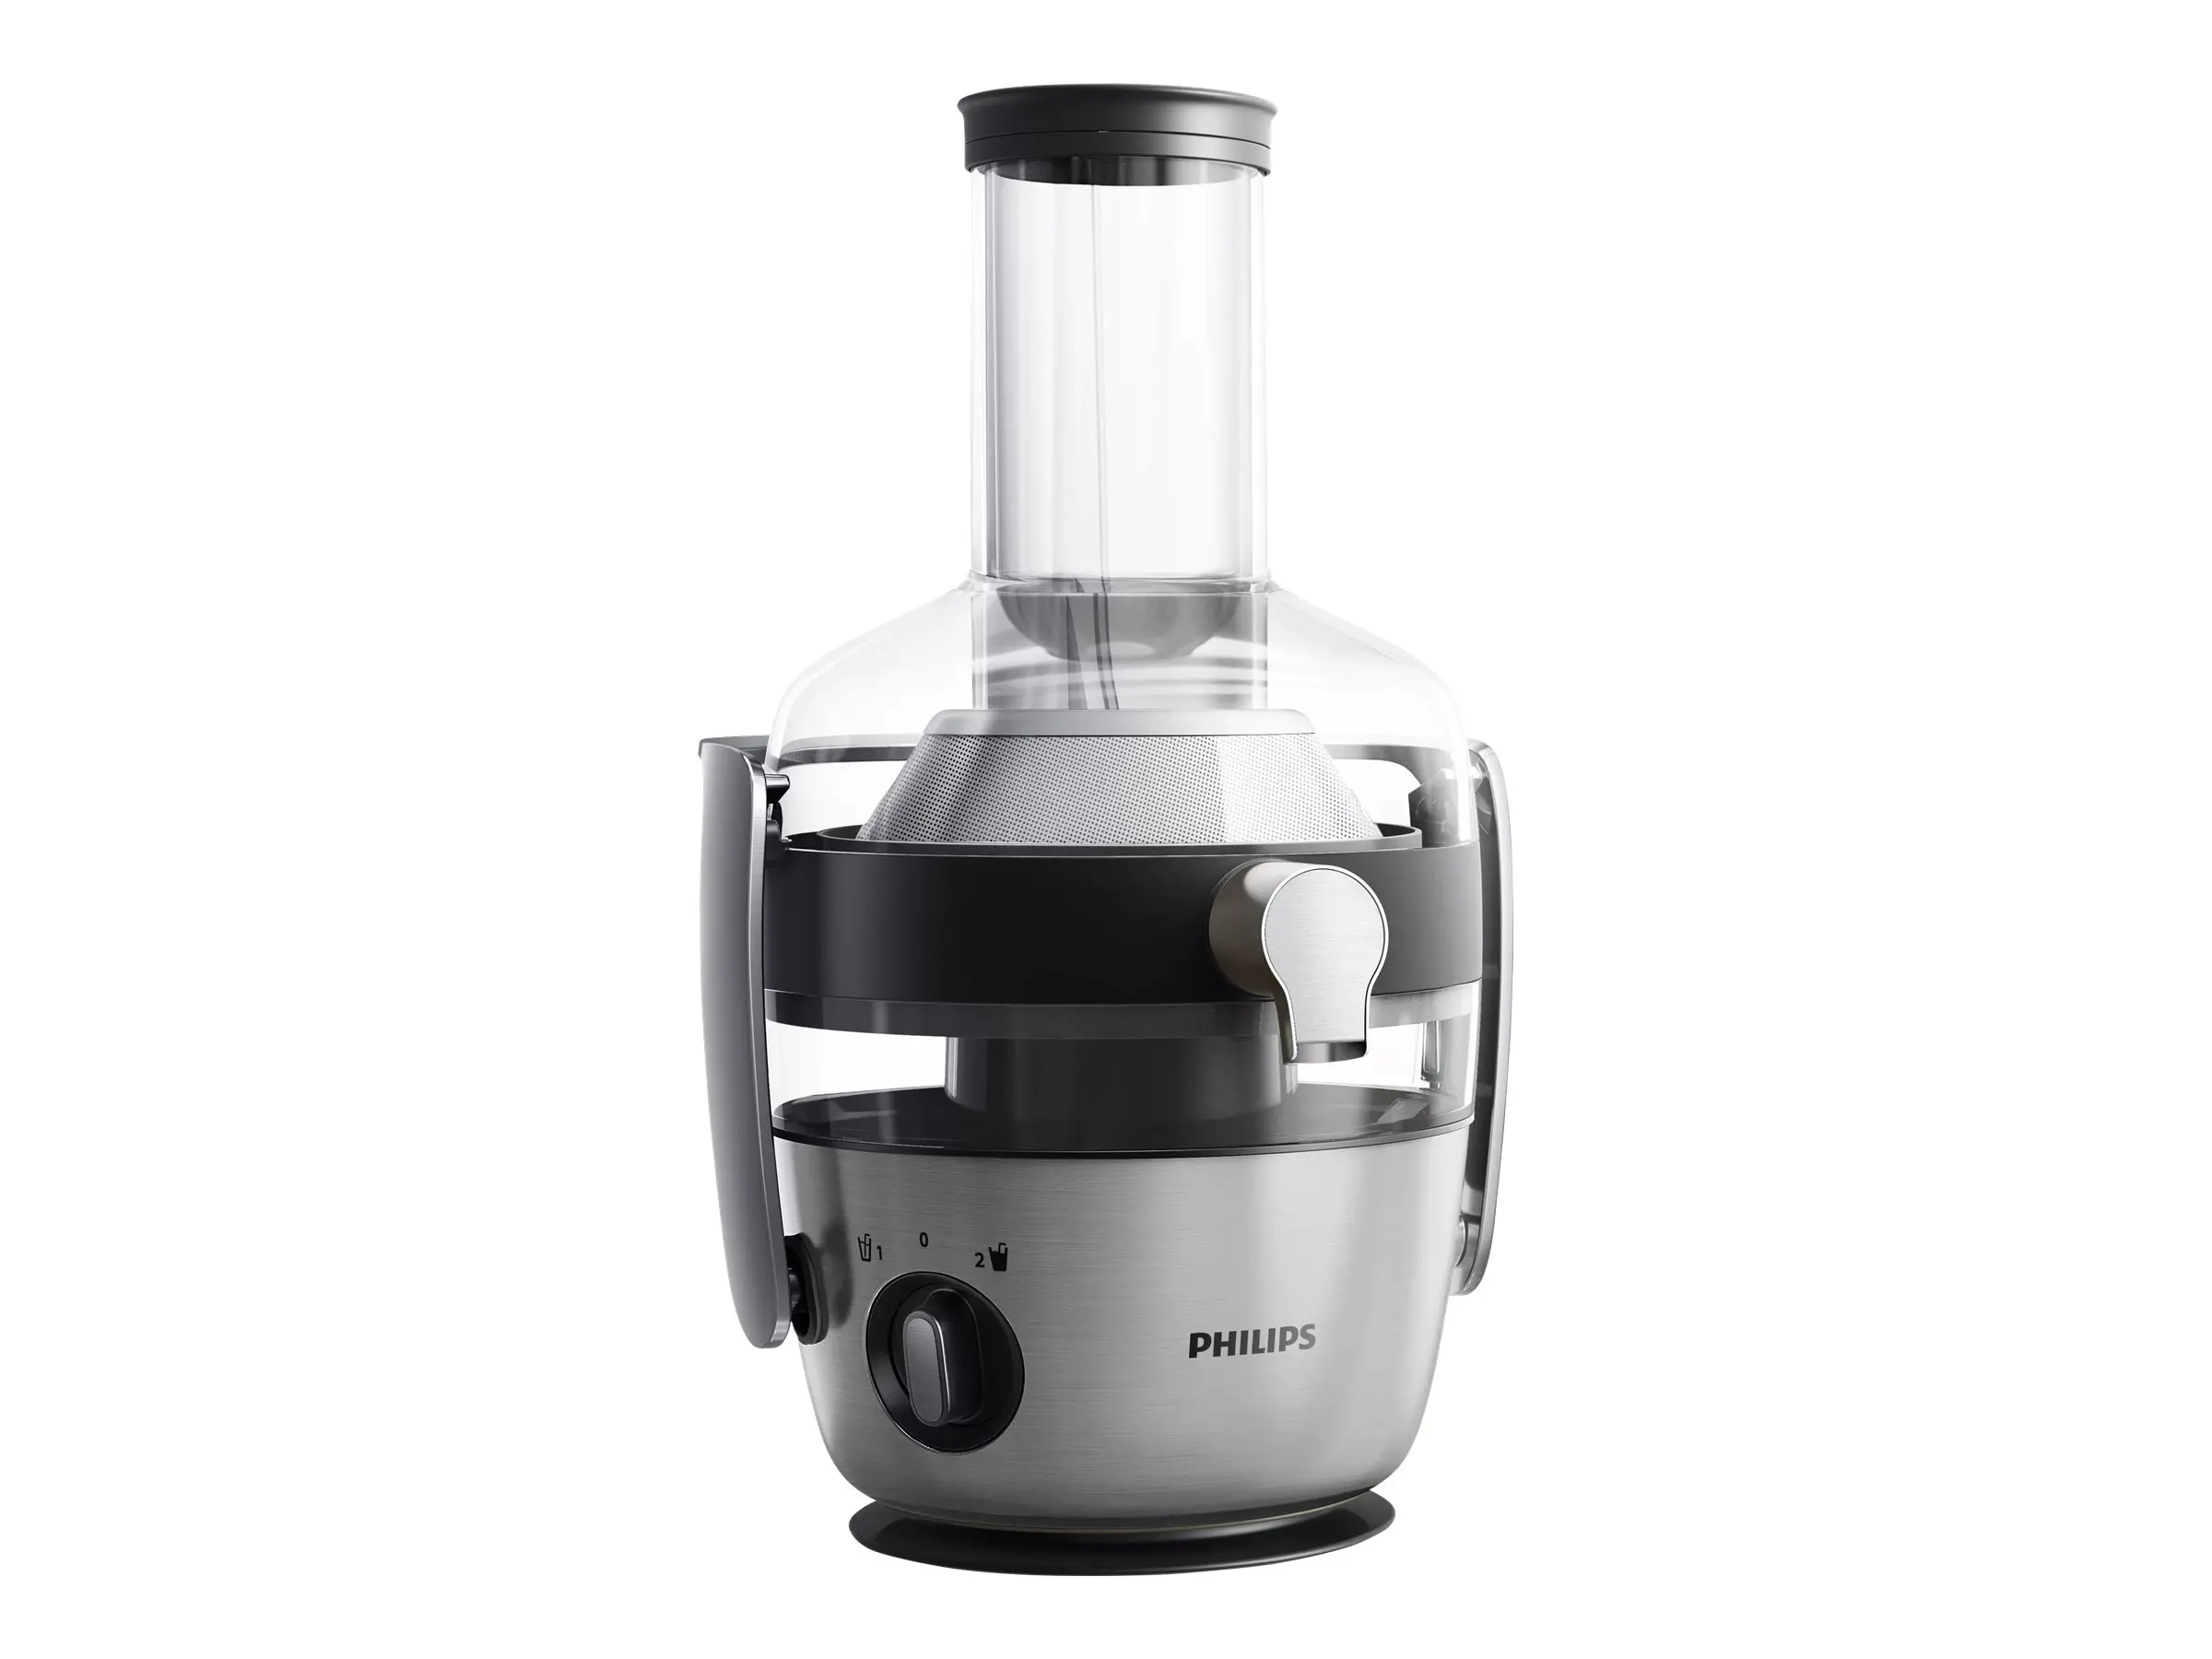 PHILIPS Avance Collection juicer QuickClean 1200W XXL tube - image 3